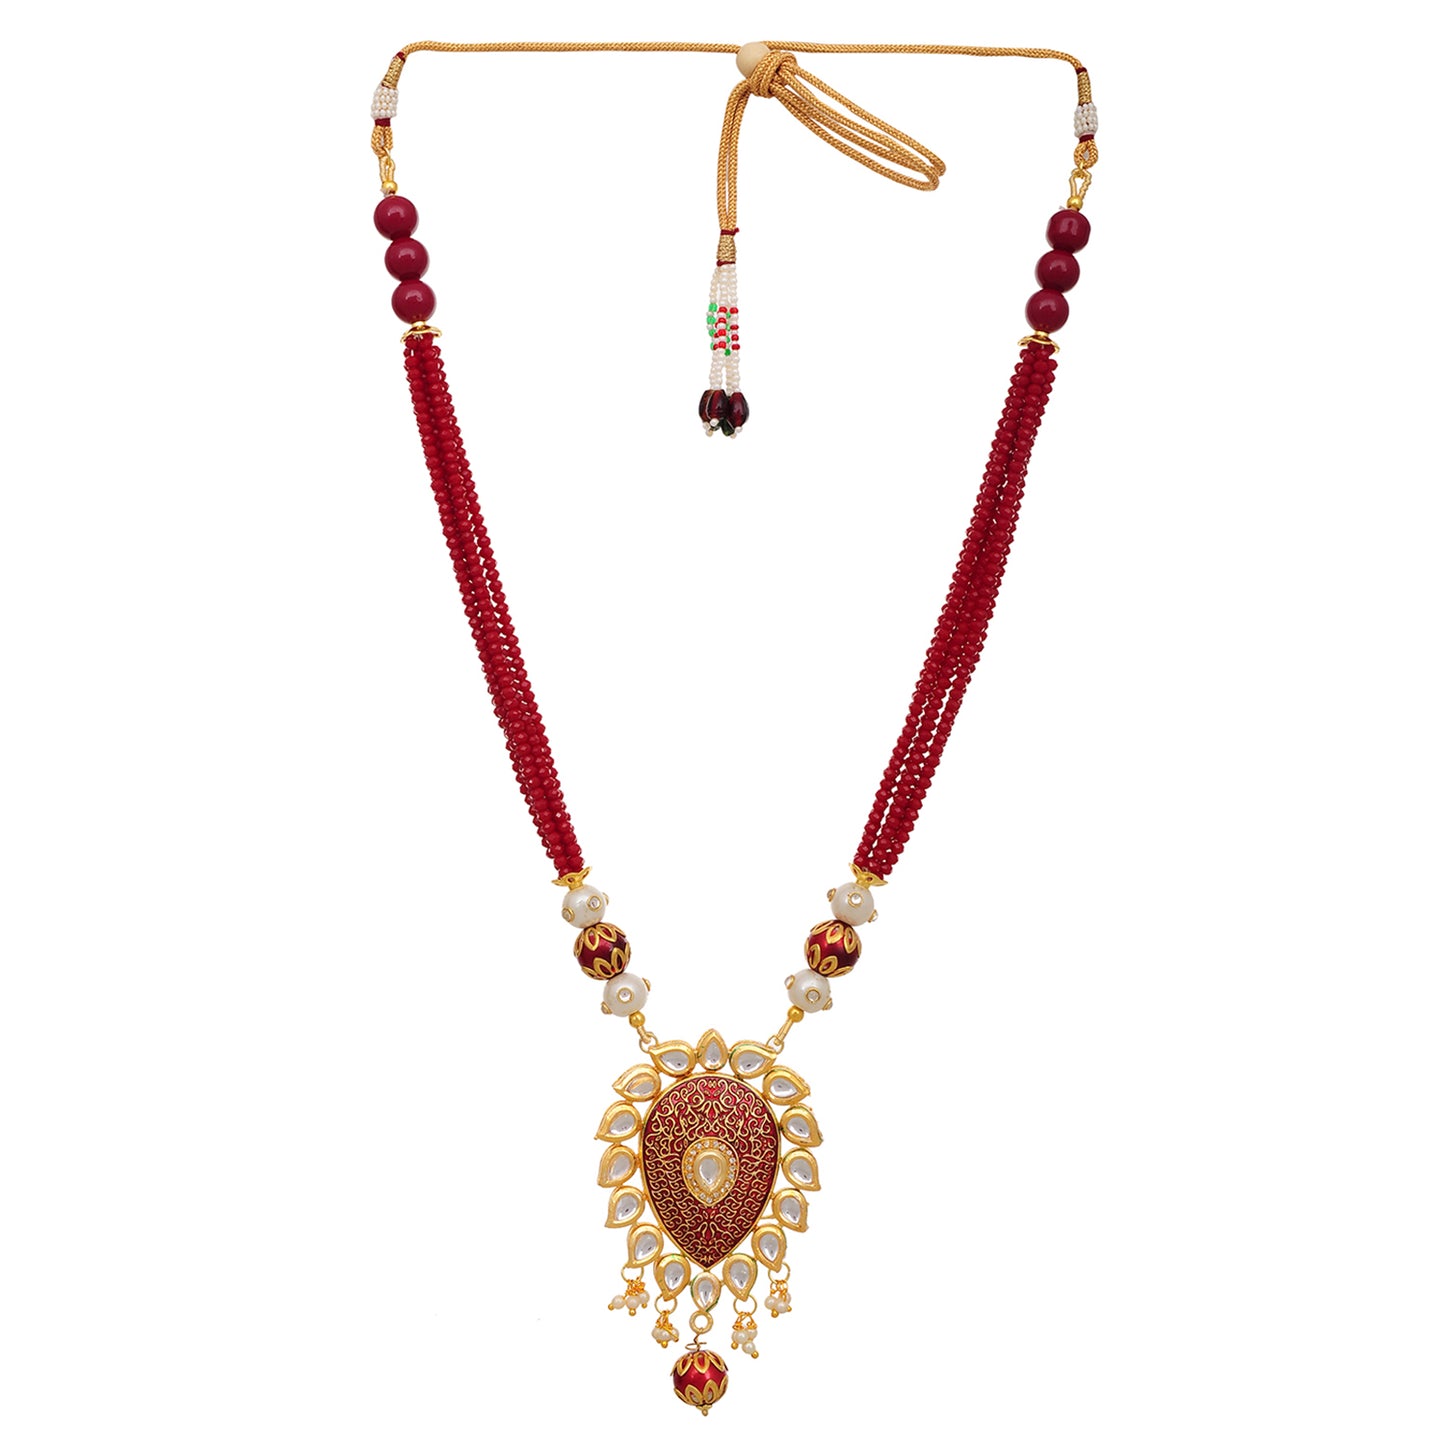 Gold Plated Enameled Kundan Meenakari Beaded Necklace with Earrings Set for Women (Red)